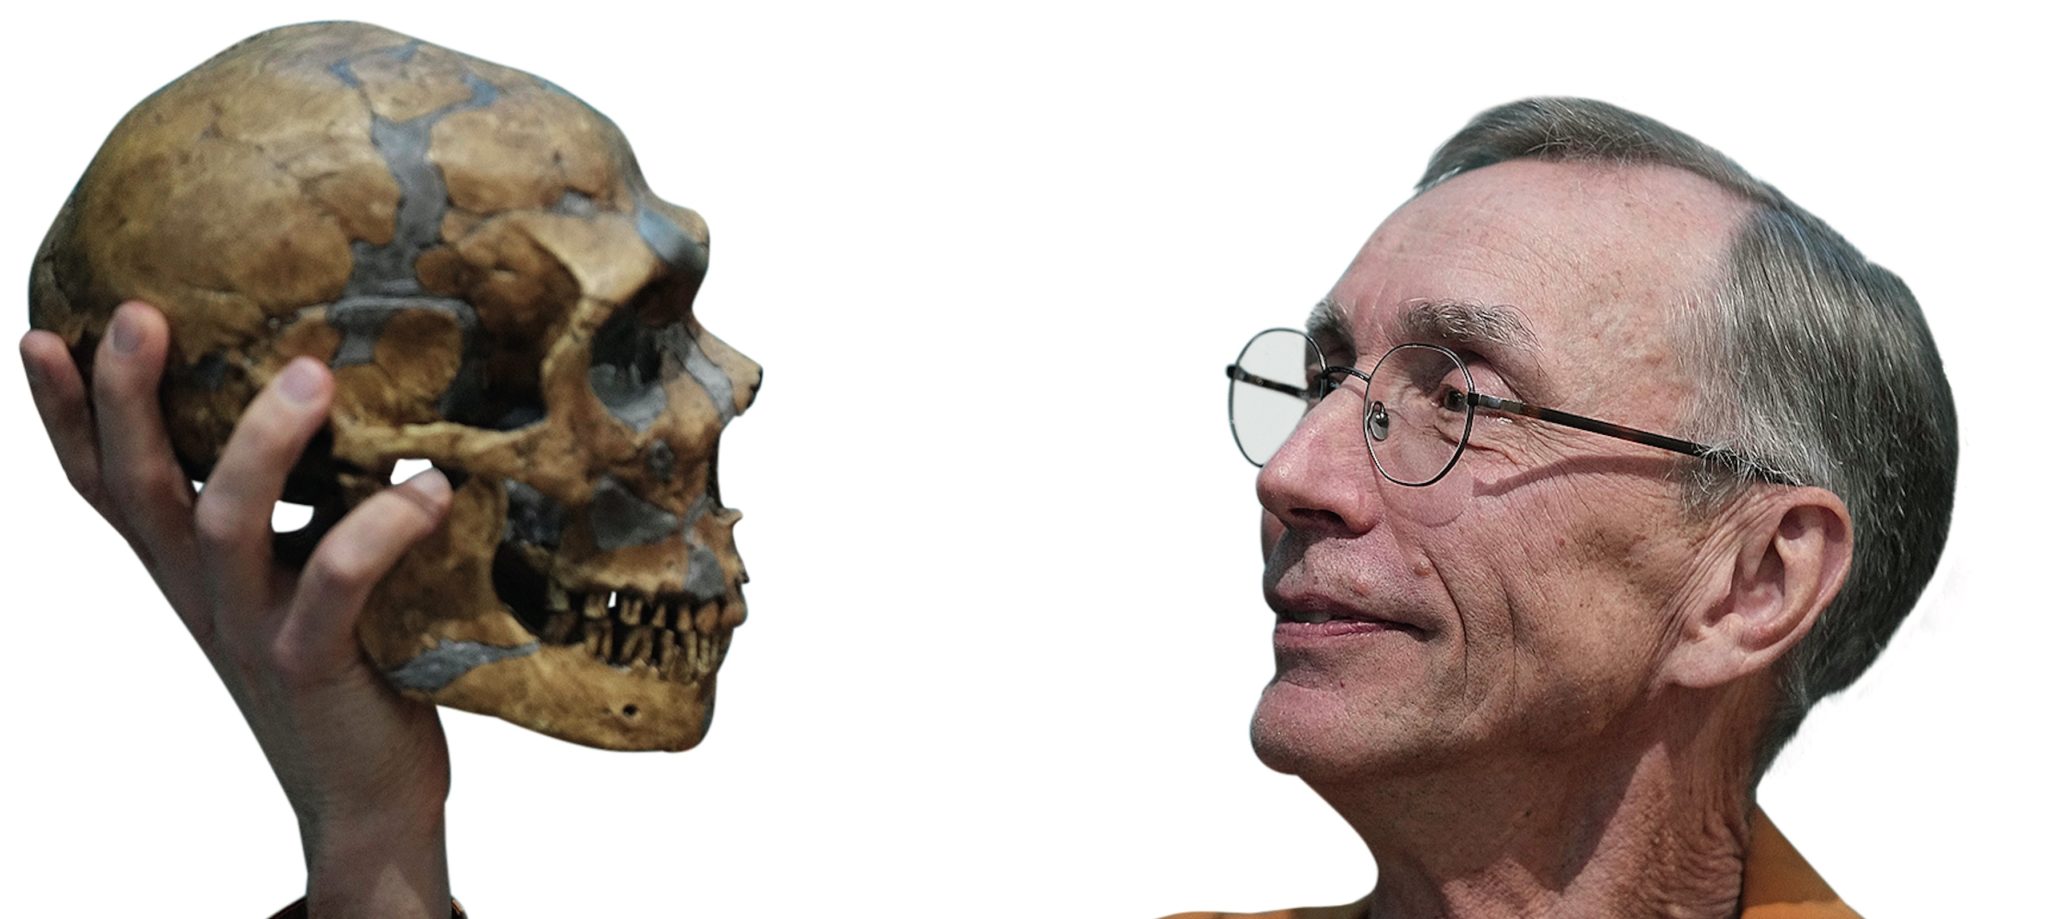 Swedish scientist Svante Paabo poses with a replica of a Neanderthal skeleton at the Max Planck Institute for Evolutionary Anthropology in Leipzig, Germany, Monday, Oct. 3, 2022. Swedish scientist Svante Paabo was awarded the 2022 Nobel Prize in Physiology or Medicine for his discoveries on human evolution.